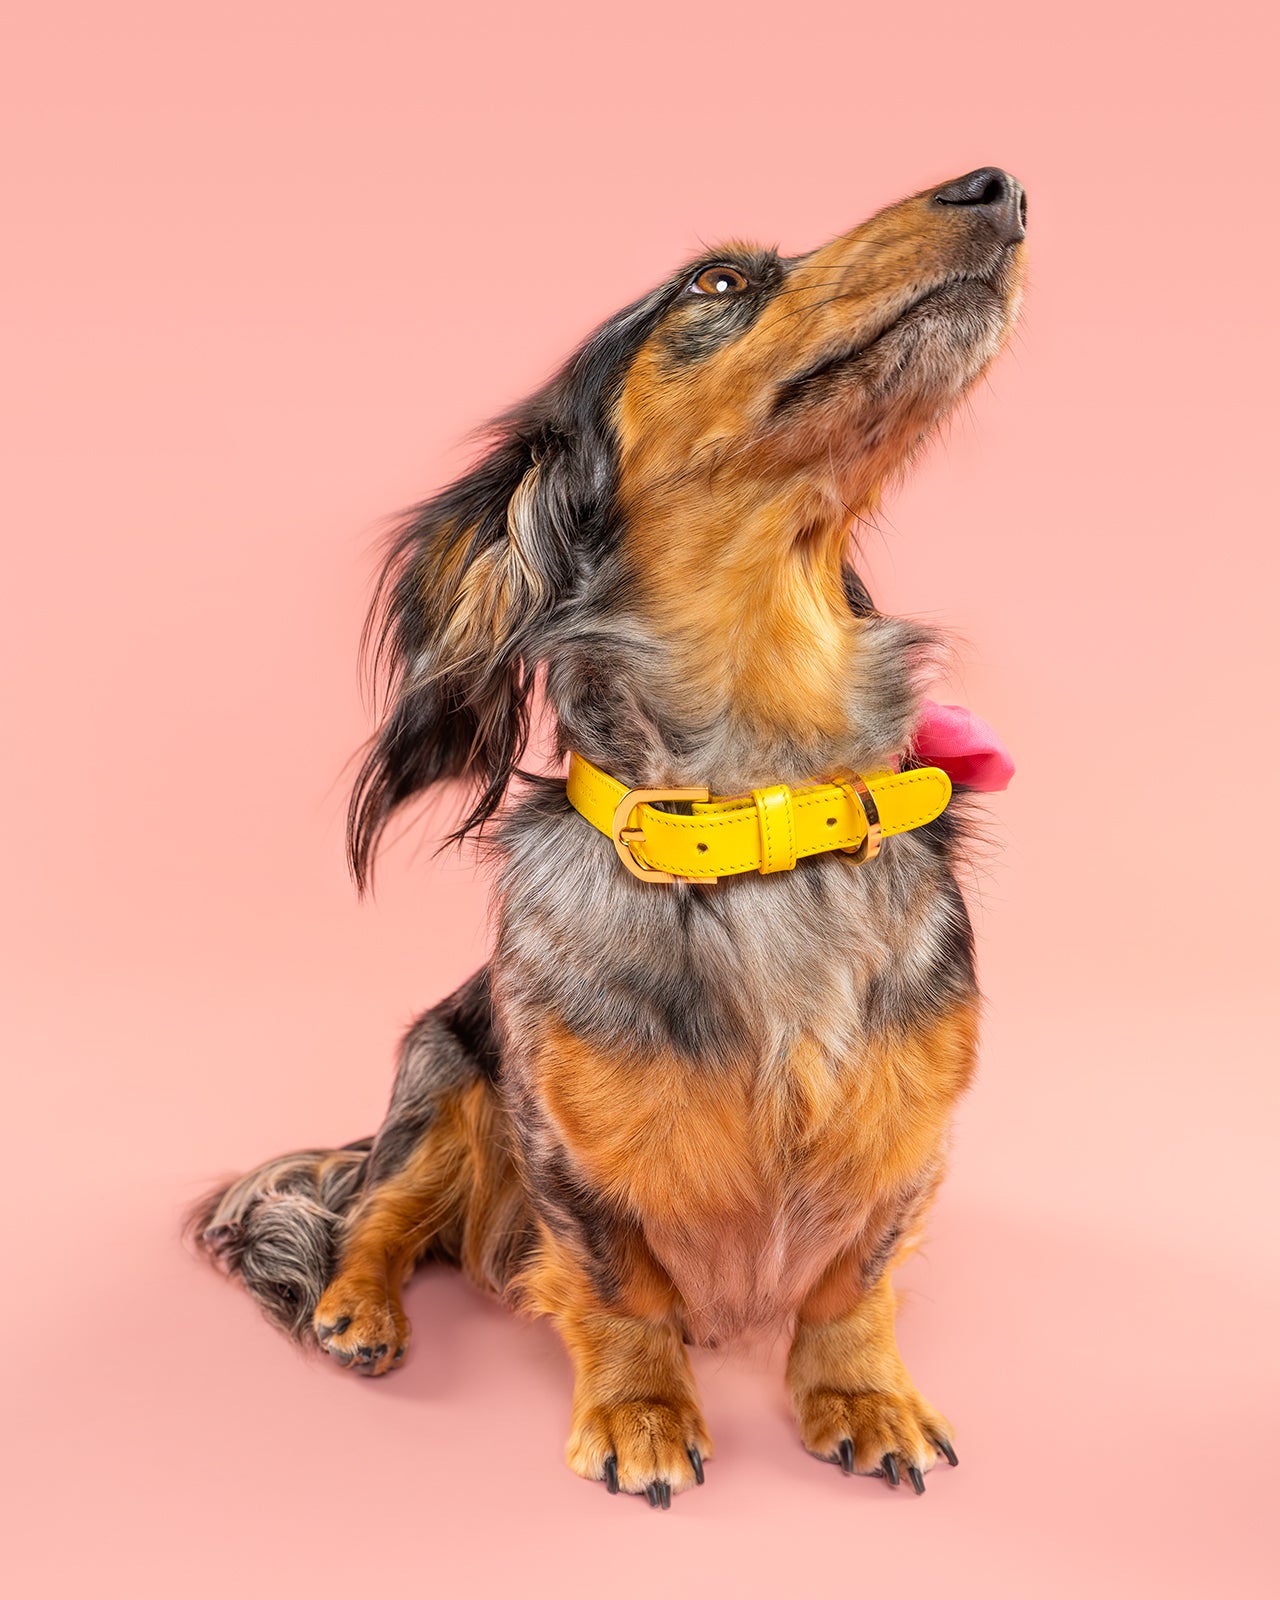 Dachshund modelling a Dear Nora Bubblegum yellow leather and pink fabric dog collar - pink background